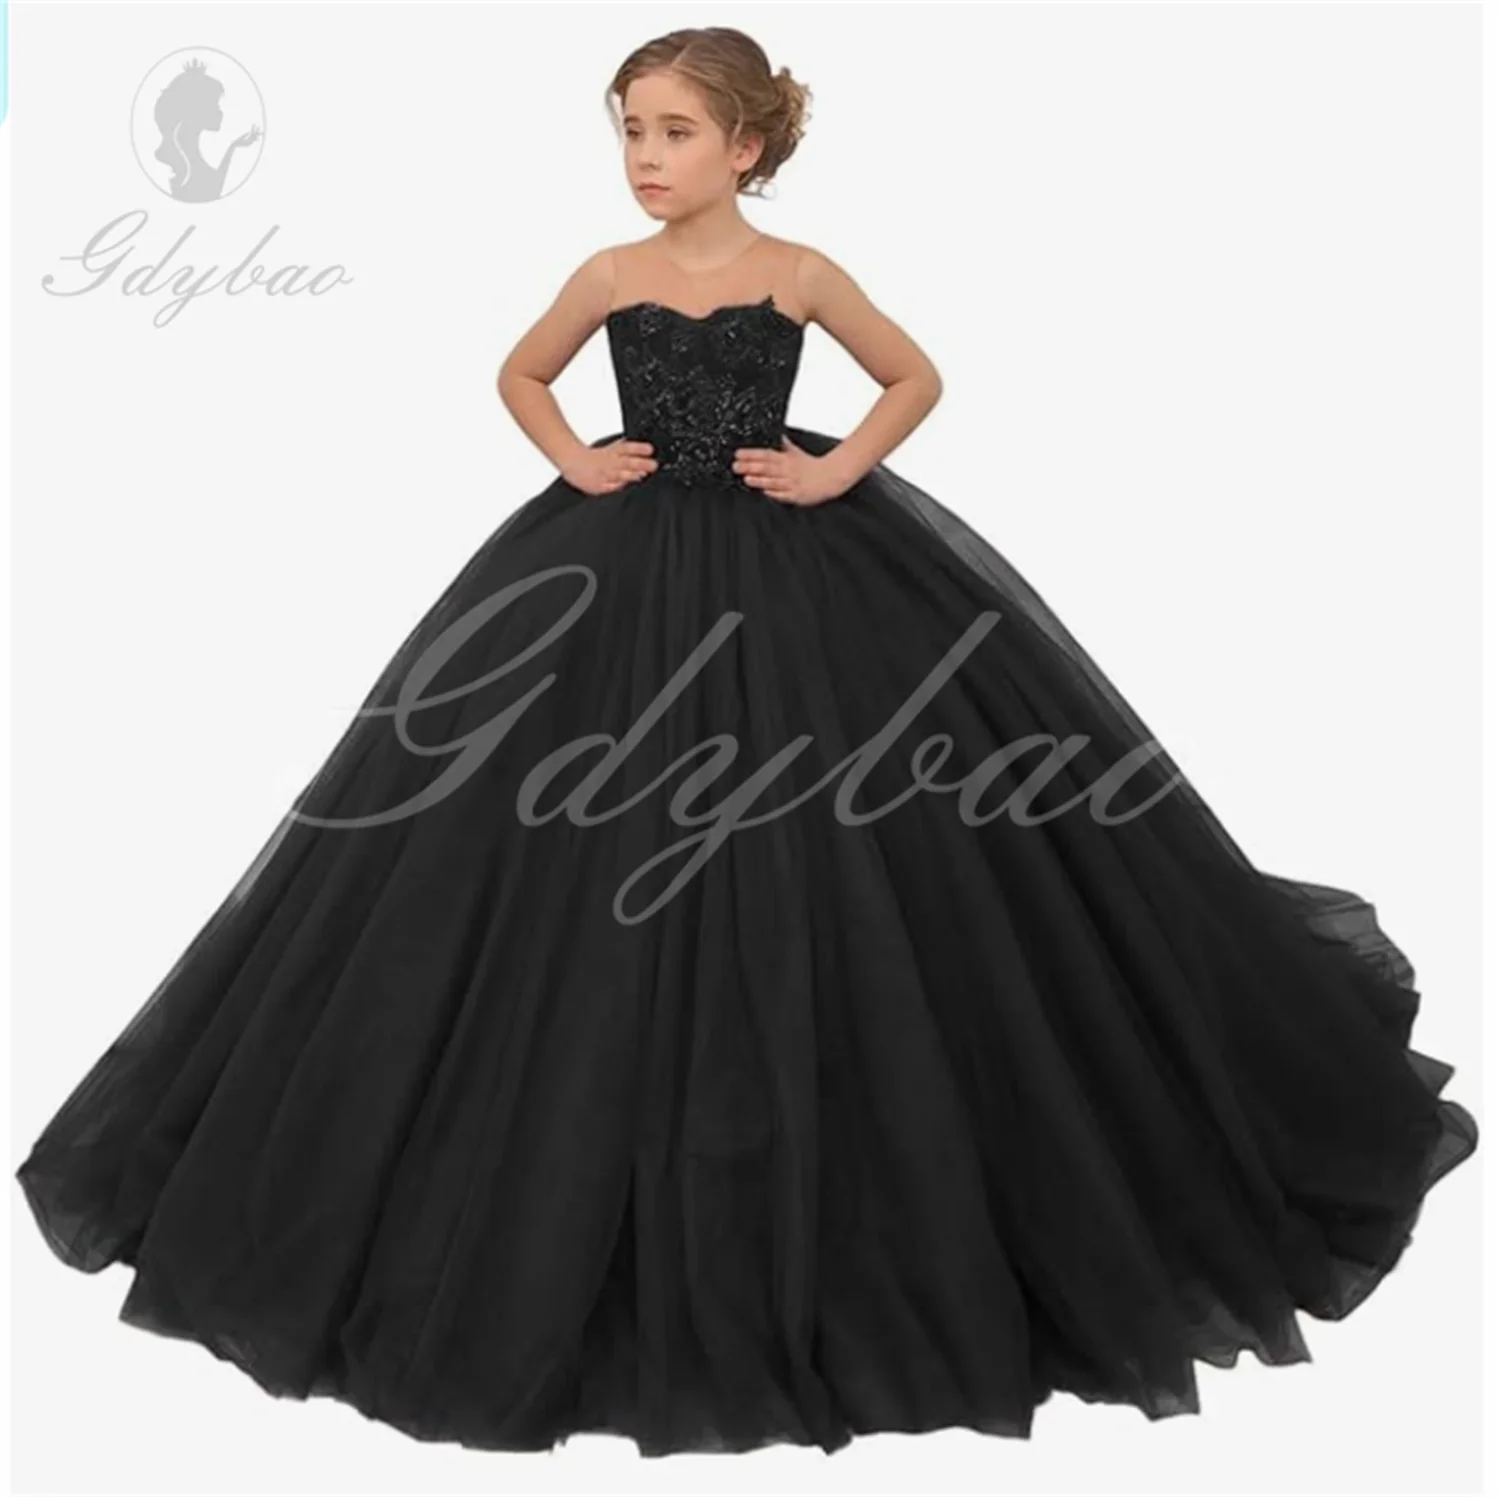 

Black Kigretn Girl's Tulle Flower Girl Dress for Wedding Lace Applique Pageant Dresses Princess Party Ball Gowns